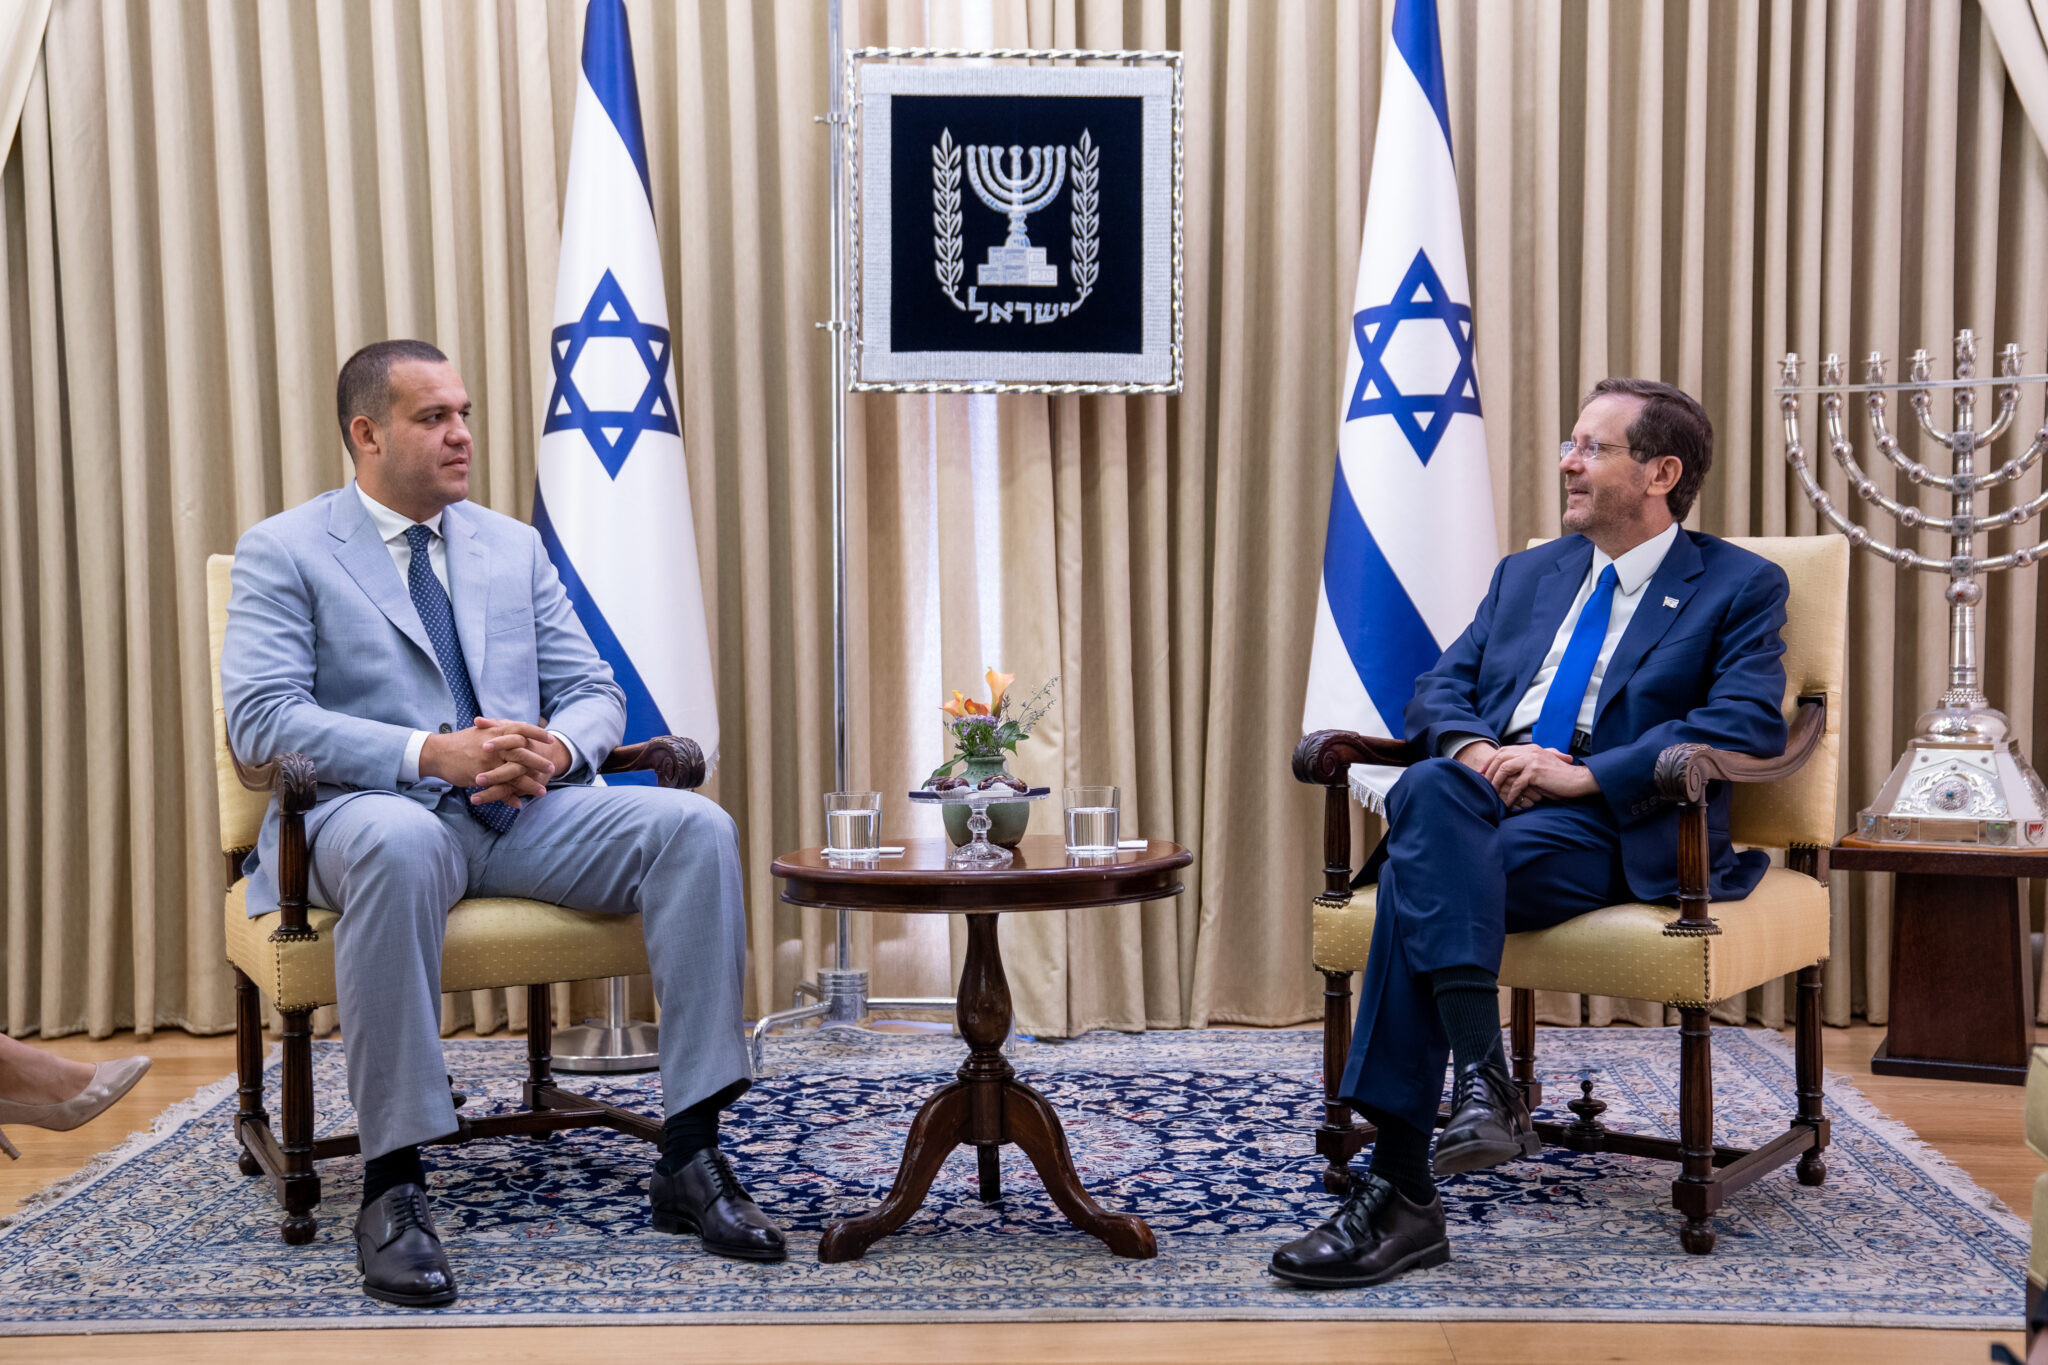 Umar Kremlev, left, met with Isaac Herzog, right, to discuss developing boxing in Israel ©IBA 